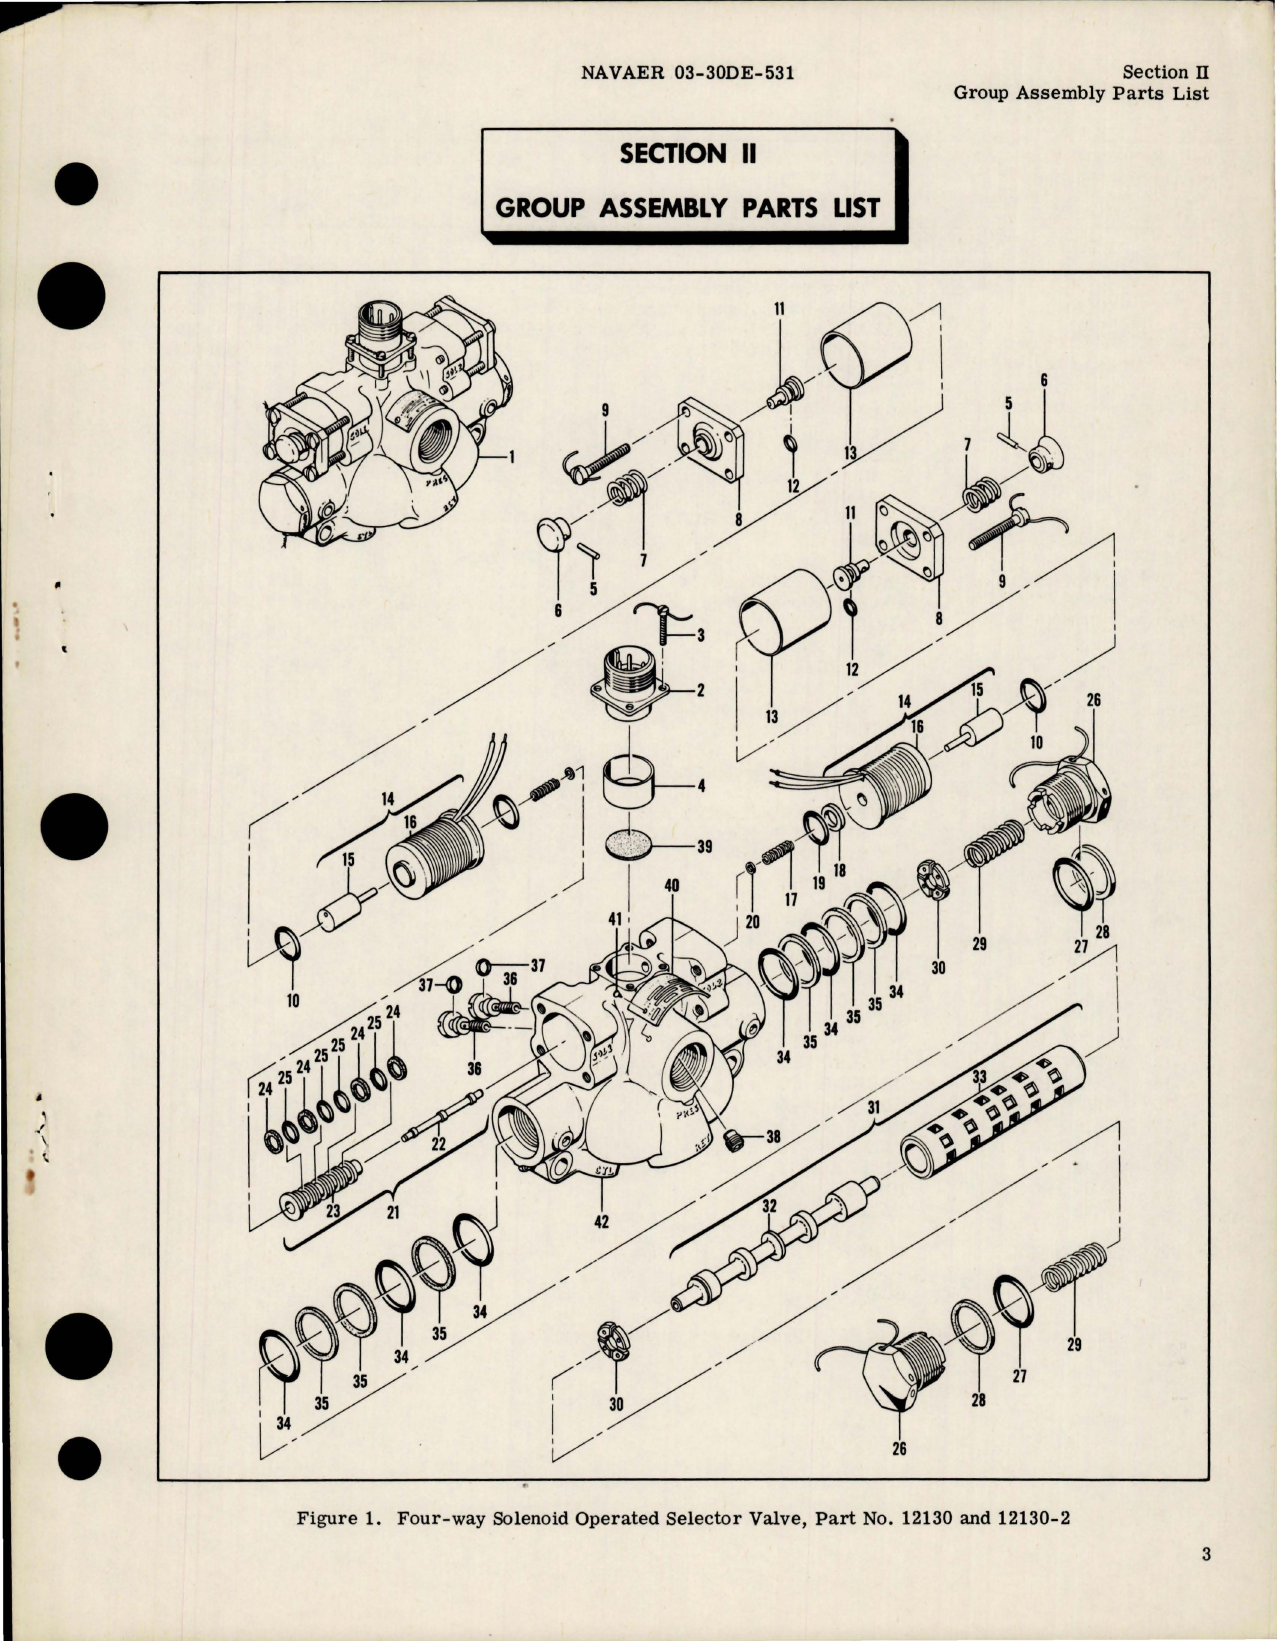 Sample page 5 from AirCorps Library document: Illustrated Parts Breakdown for Four-Way Solenoid Operated Selector Valves - Parts 12130, 12130-2 and 12390 